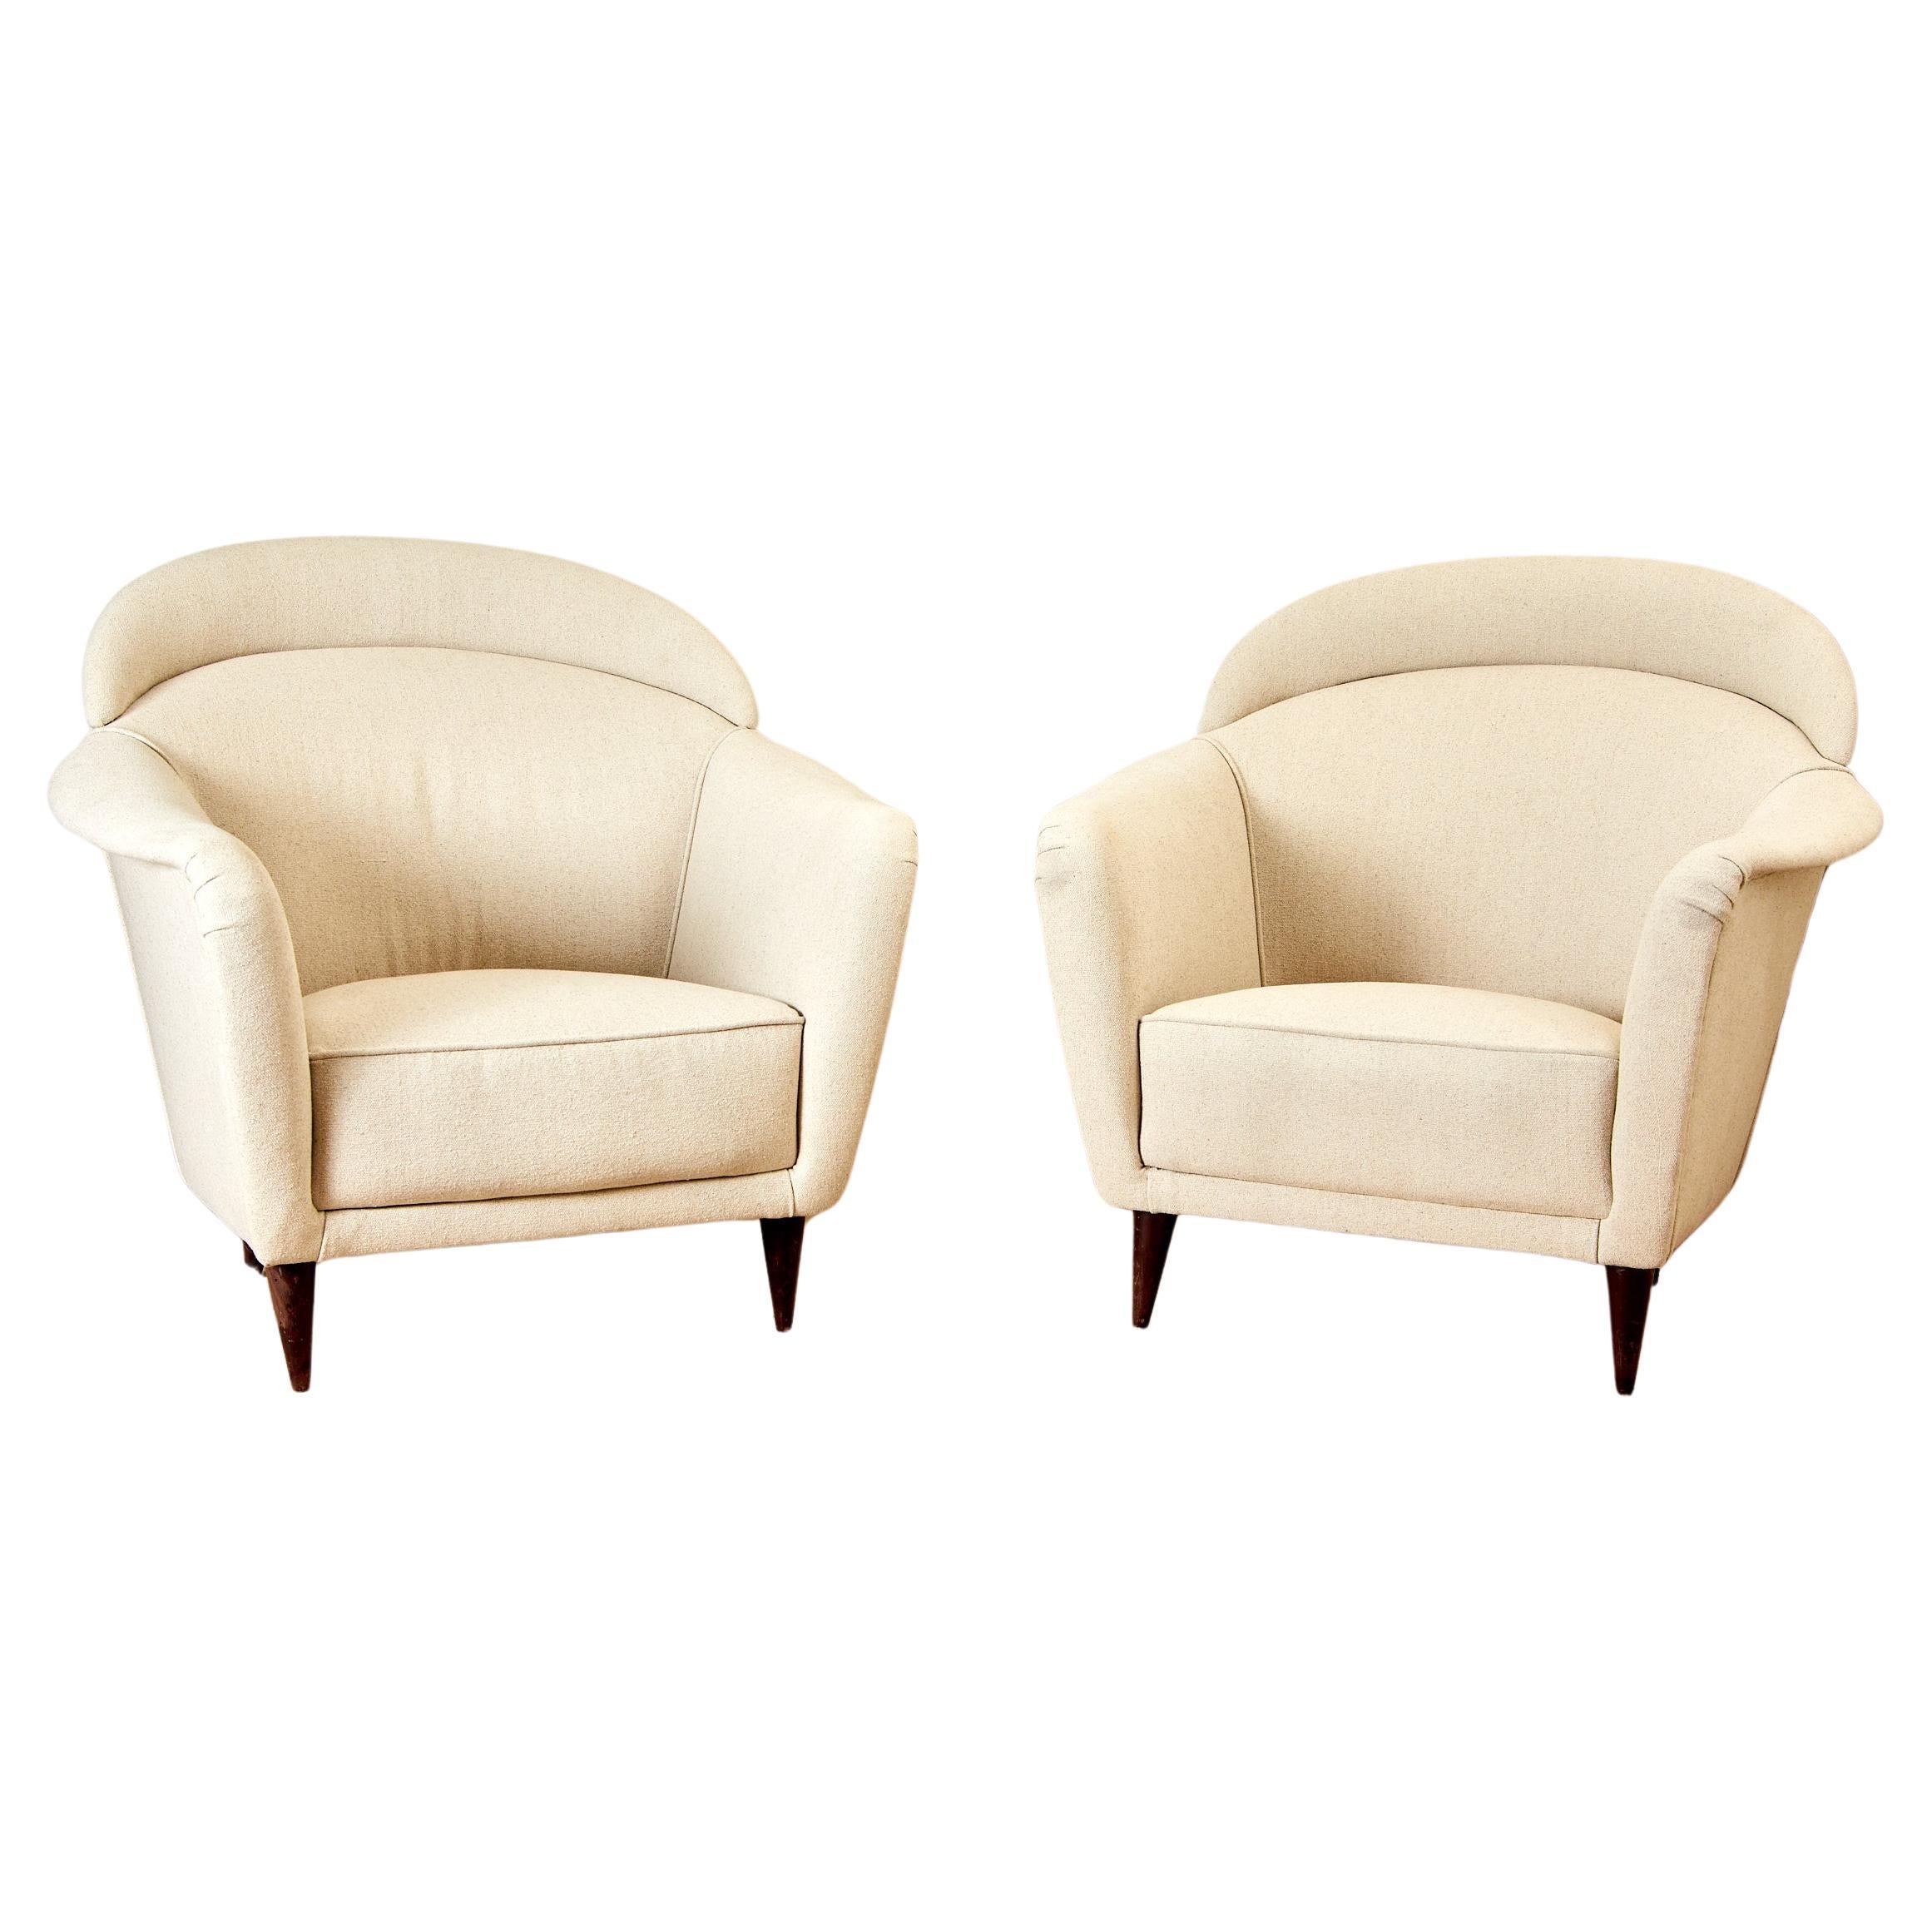 Pair of armchairs, wood and cotton, circa 1970, Italy. For Sale